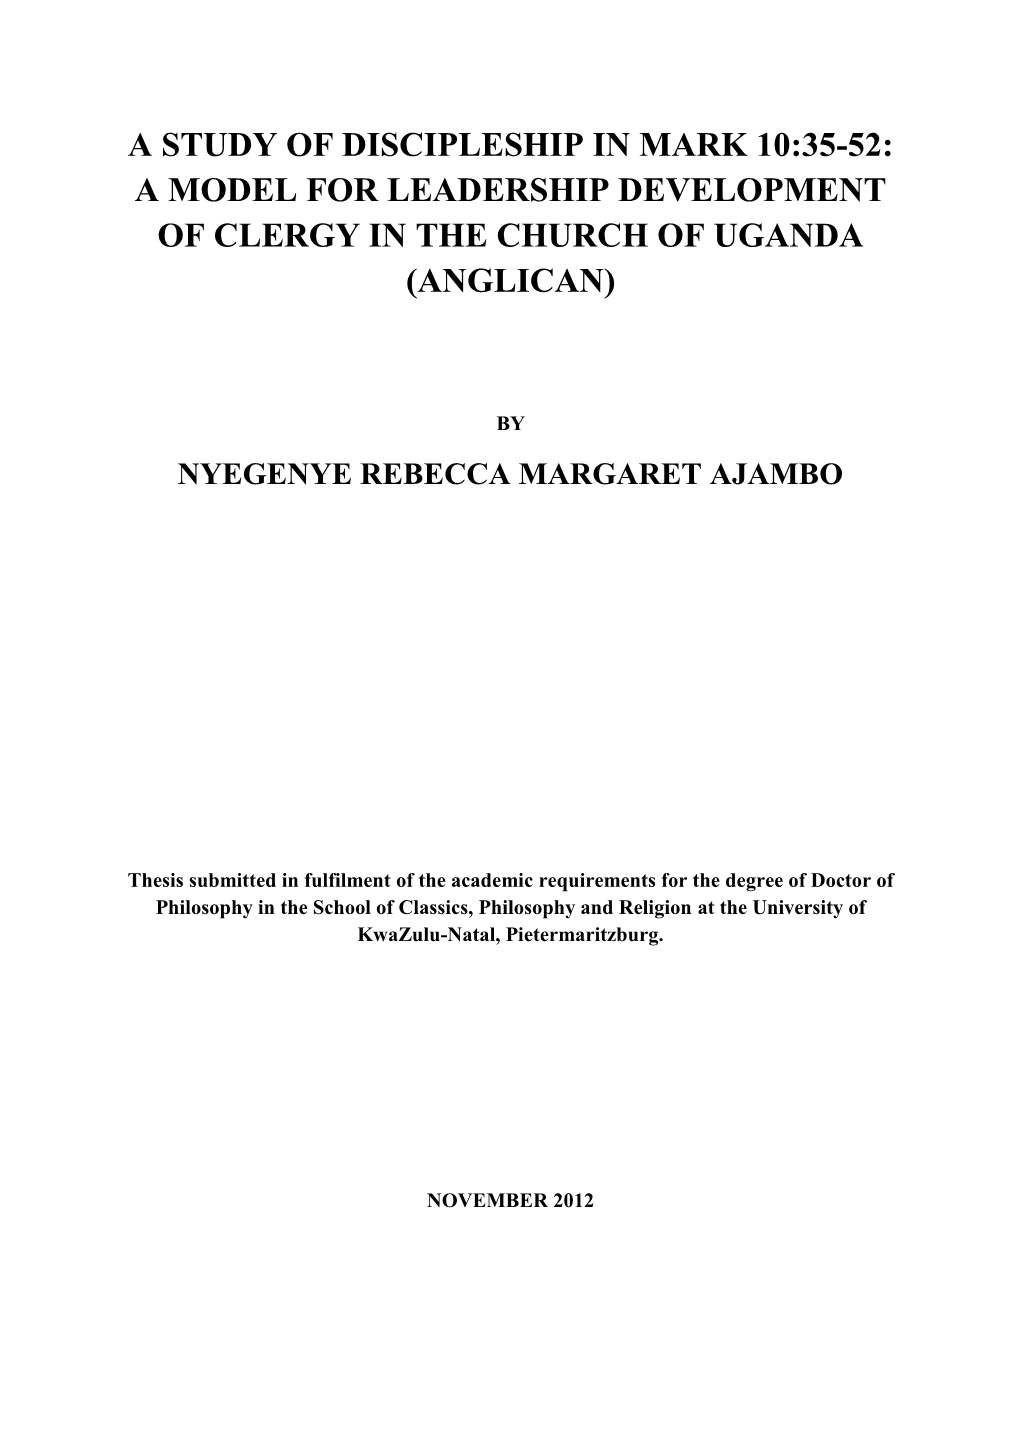 A Model for Leadership Development of Clergy in the Church of Uganda (Anglican)